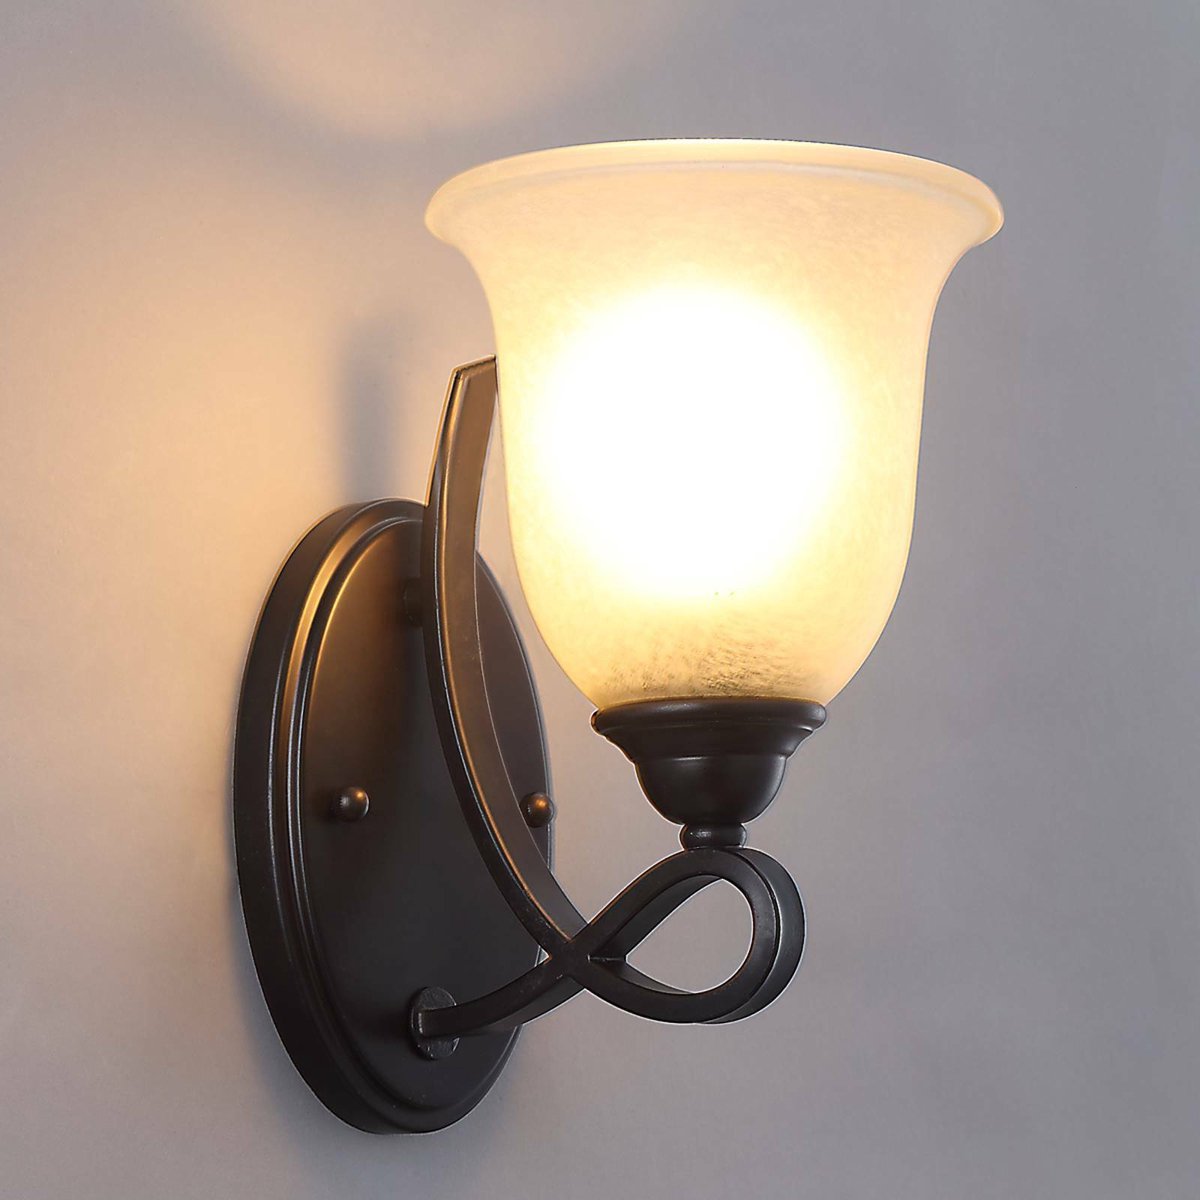 Lucande - LED wandlamp - 1licht - metaal, glas - H: 25 cm - E27 - donkerbruin, wit - Inclusief lichtbron